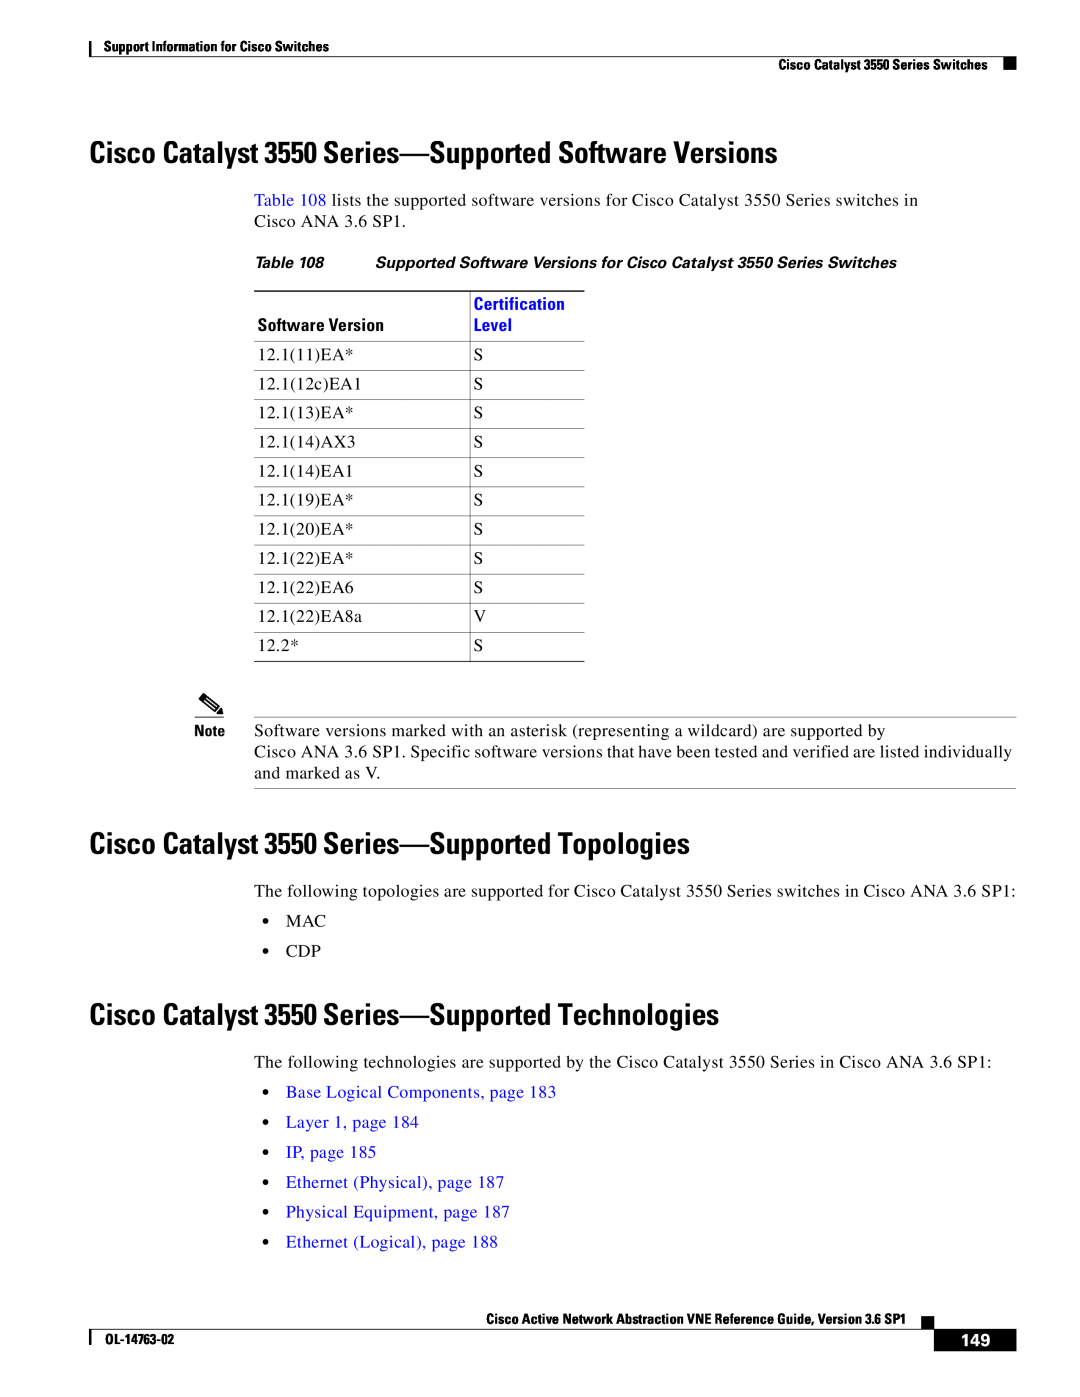 Cisco Systems OL-14763-02 manual Cisco Catalyst 3550 Series-Supported Software Versions, Ethernet Logical, page 